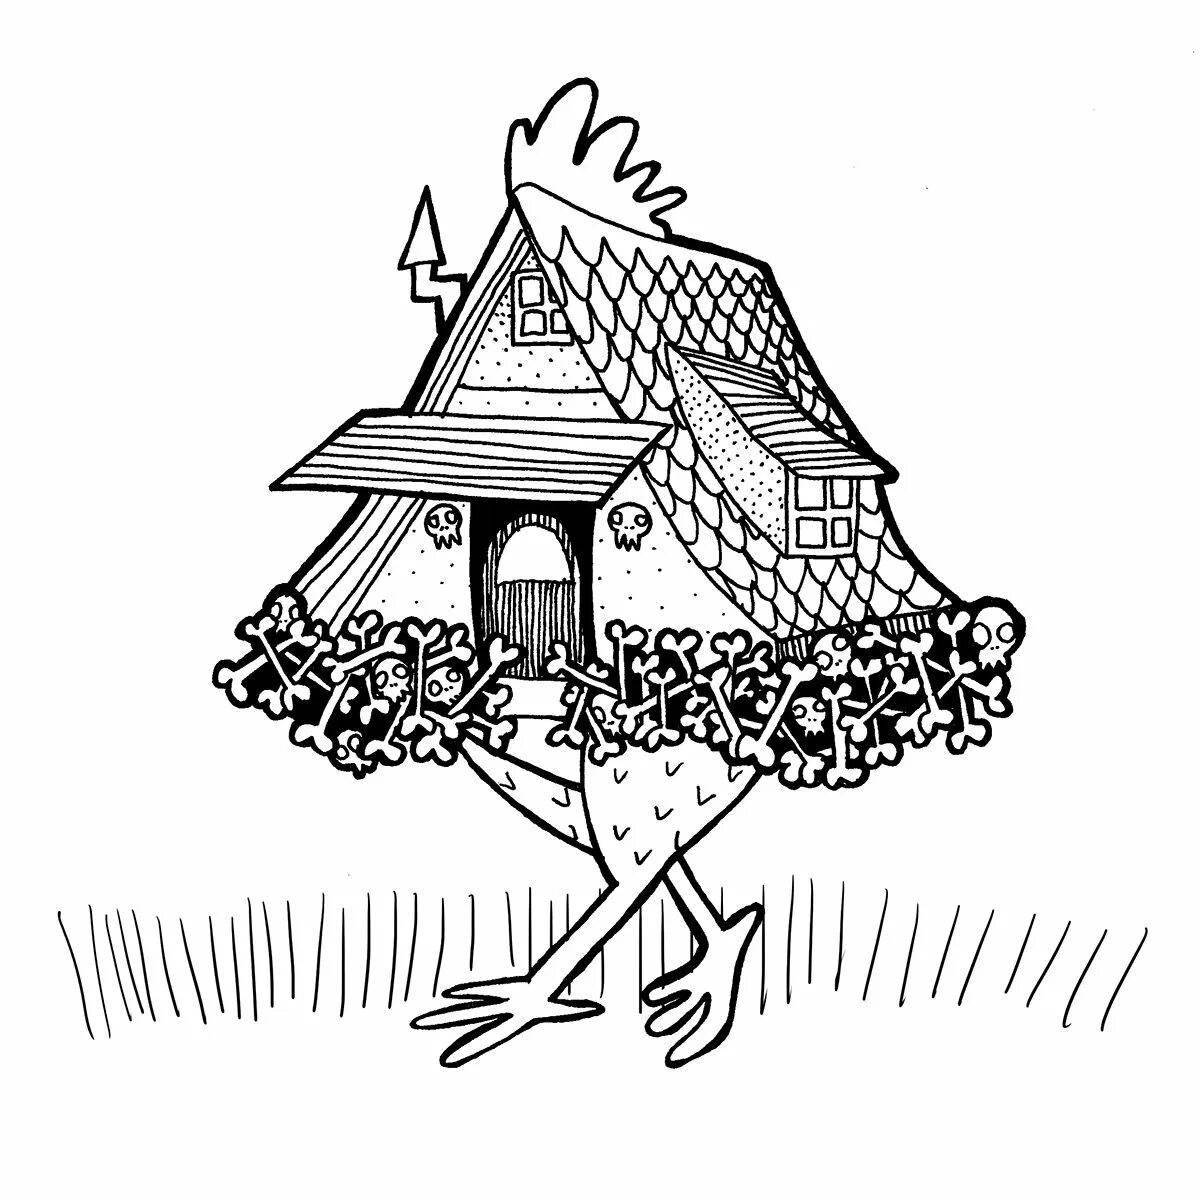 Coloring book house of the mysterious Baba Yaga